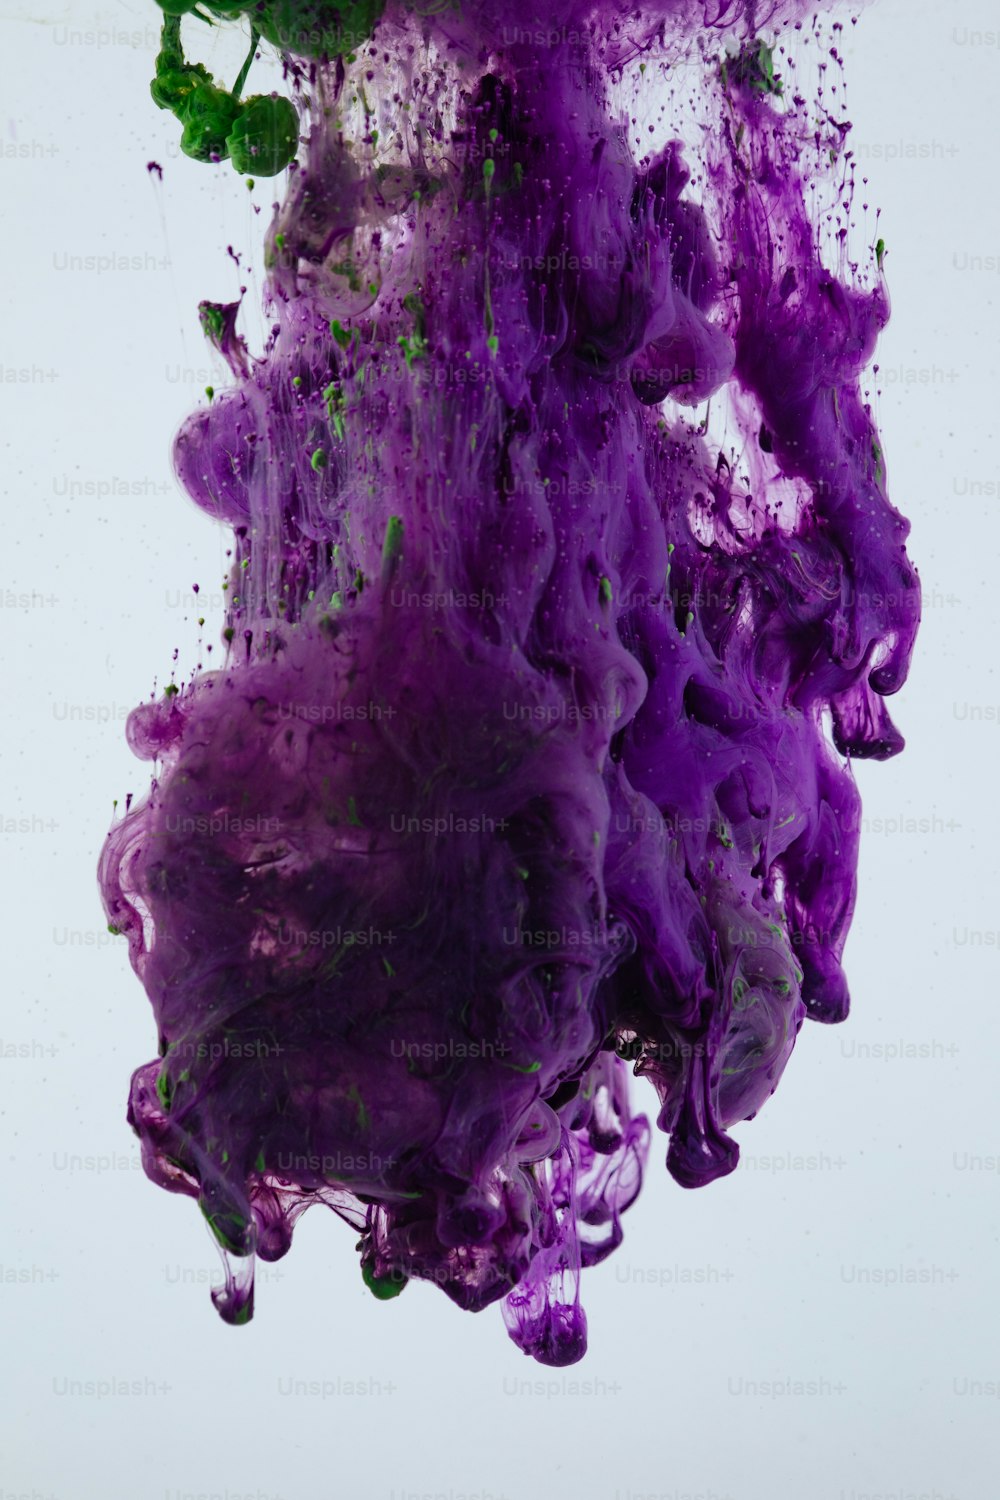 a purple substance is floating in the air